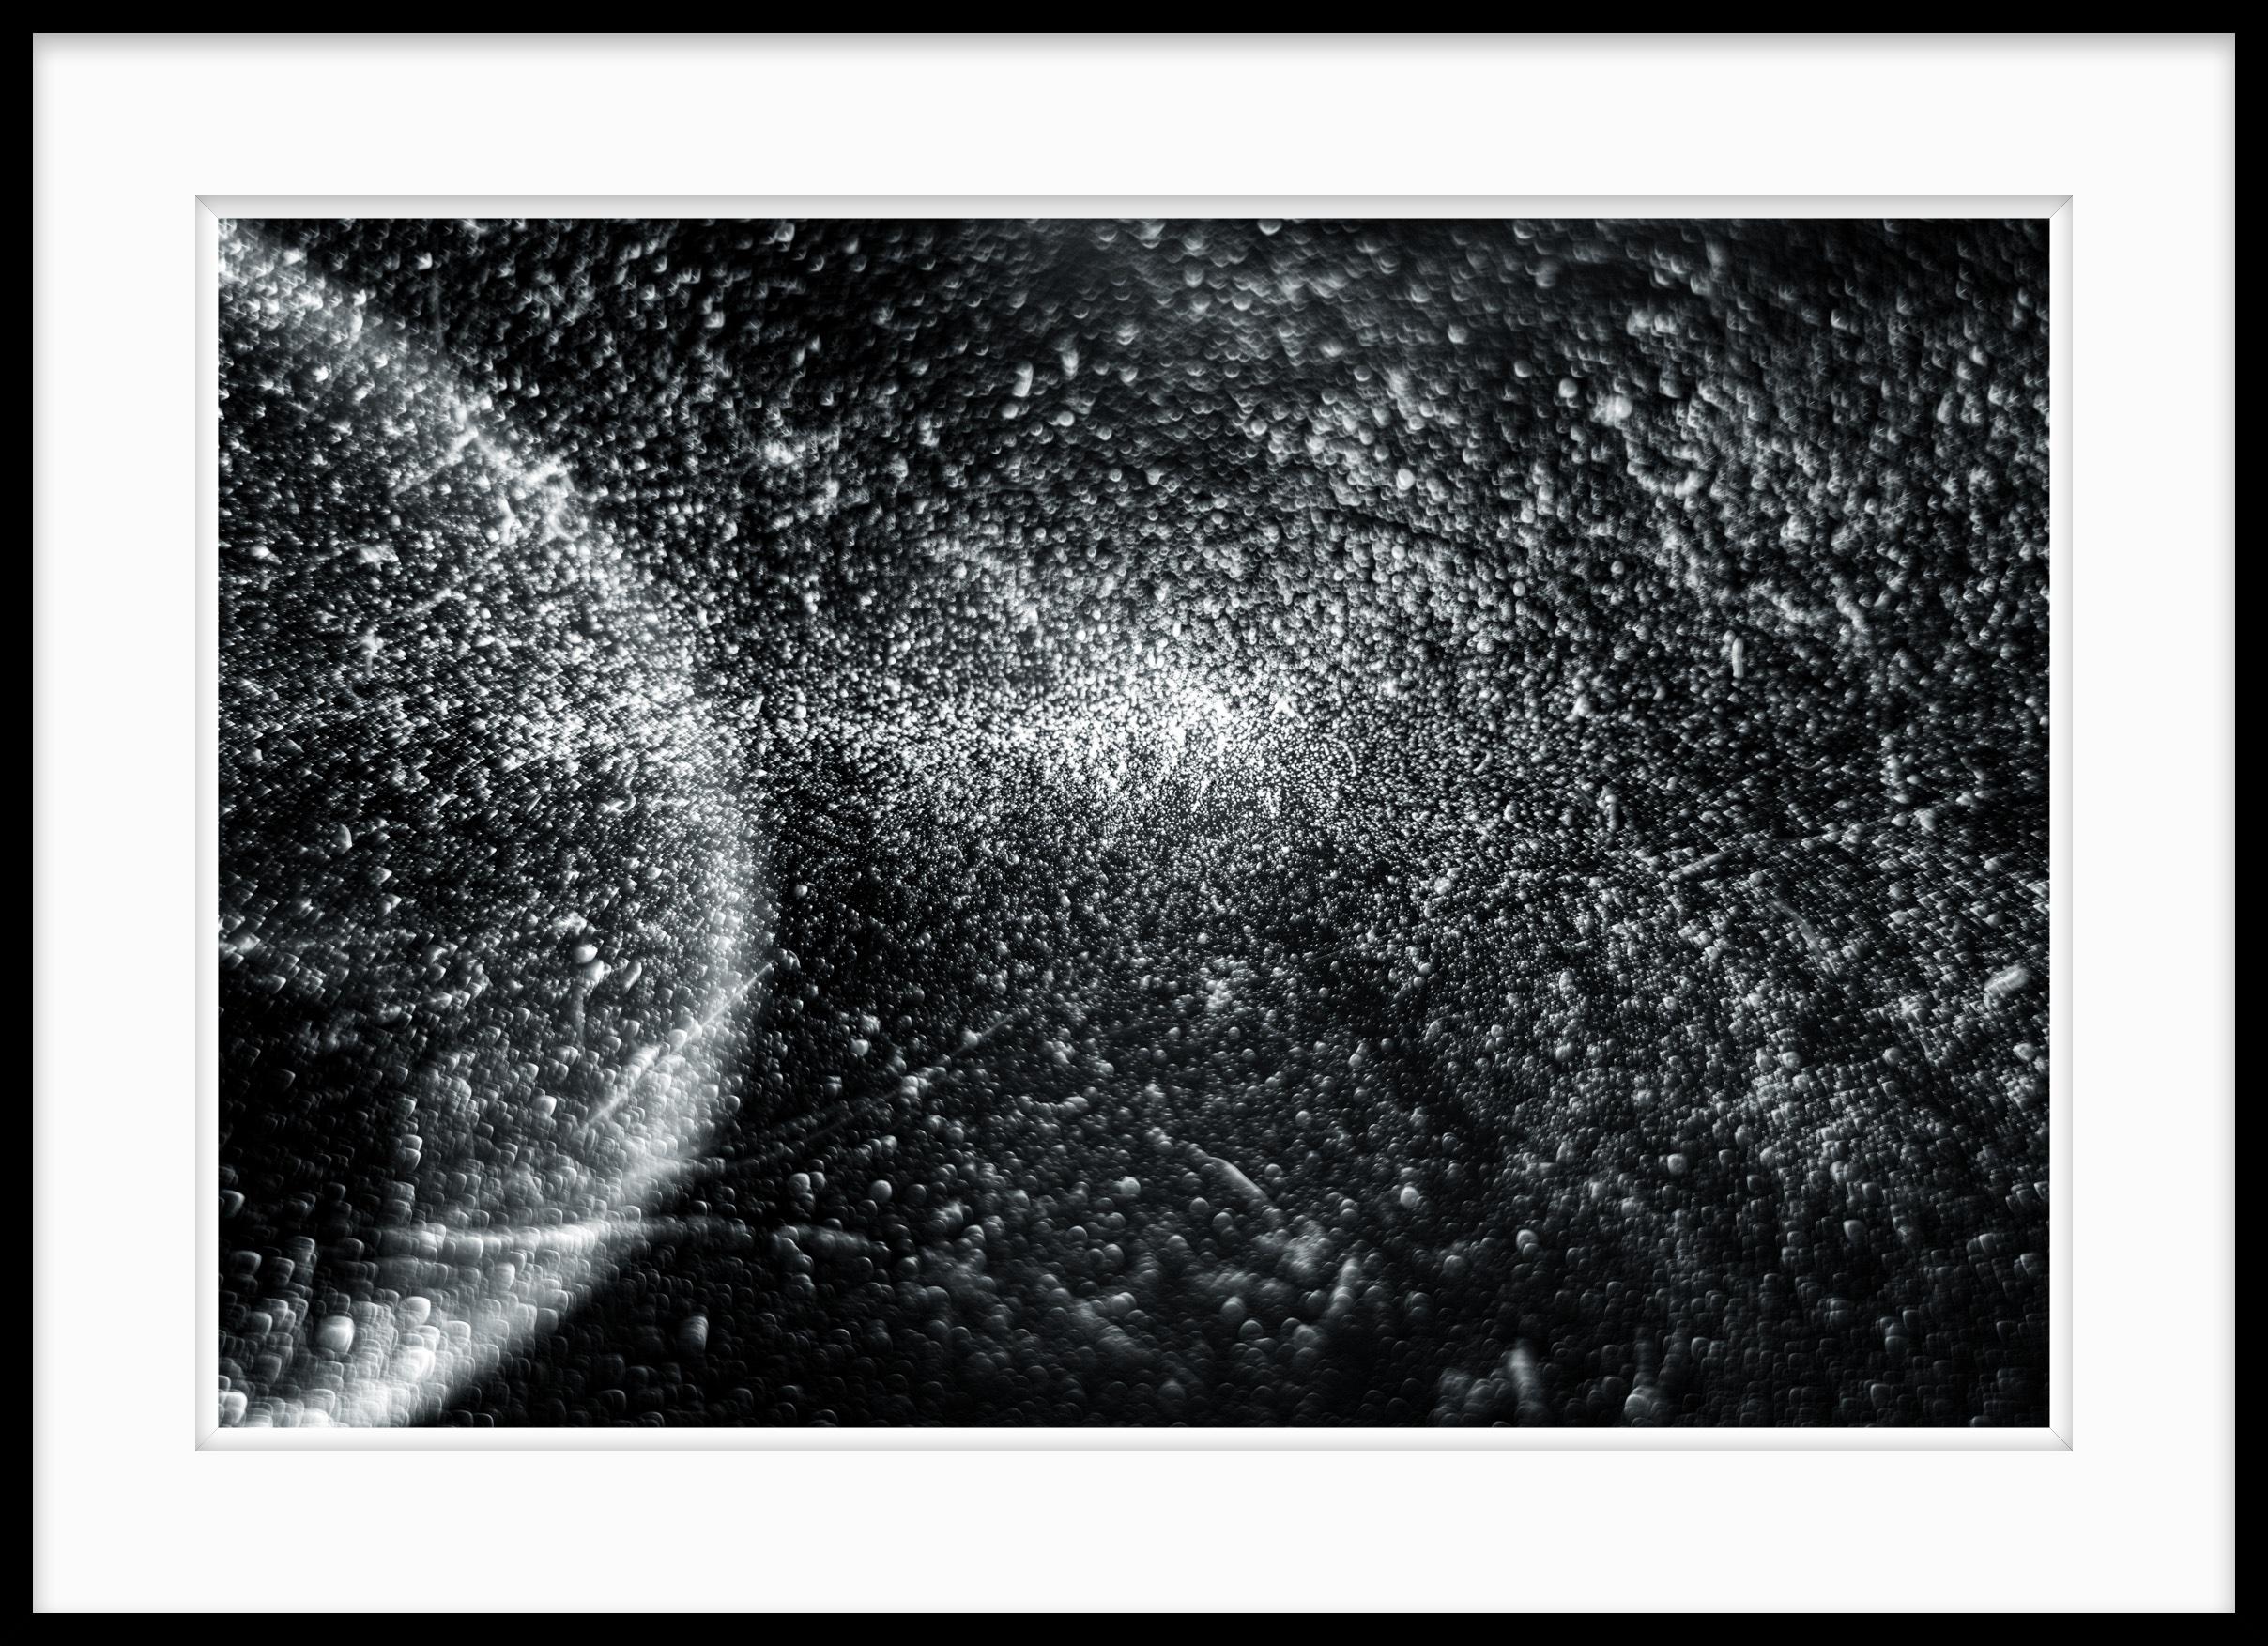 This is Untitled #44 from the Nature of Particles series.

The Nature of Particles series consists of abstract photographs of ordinary particulates, that we observe in our everyday surroundings as floating fragments seen in shafts of light.

My